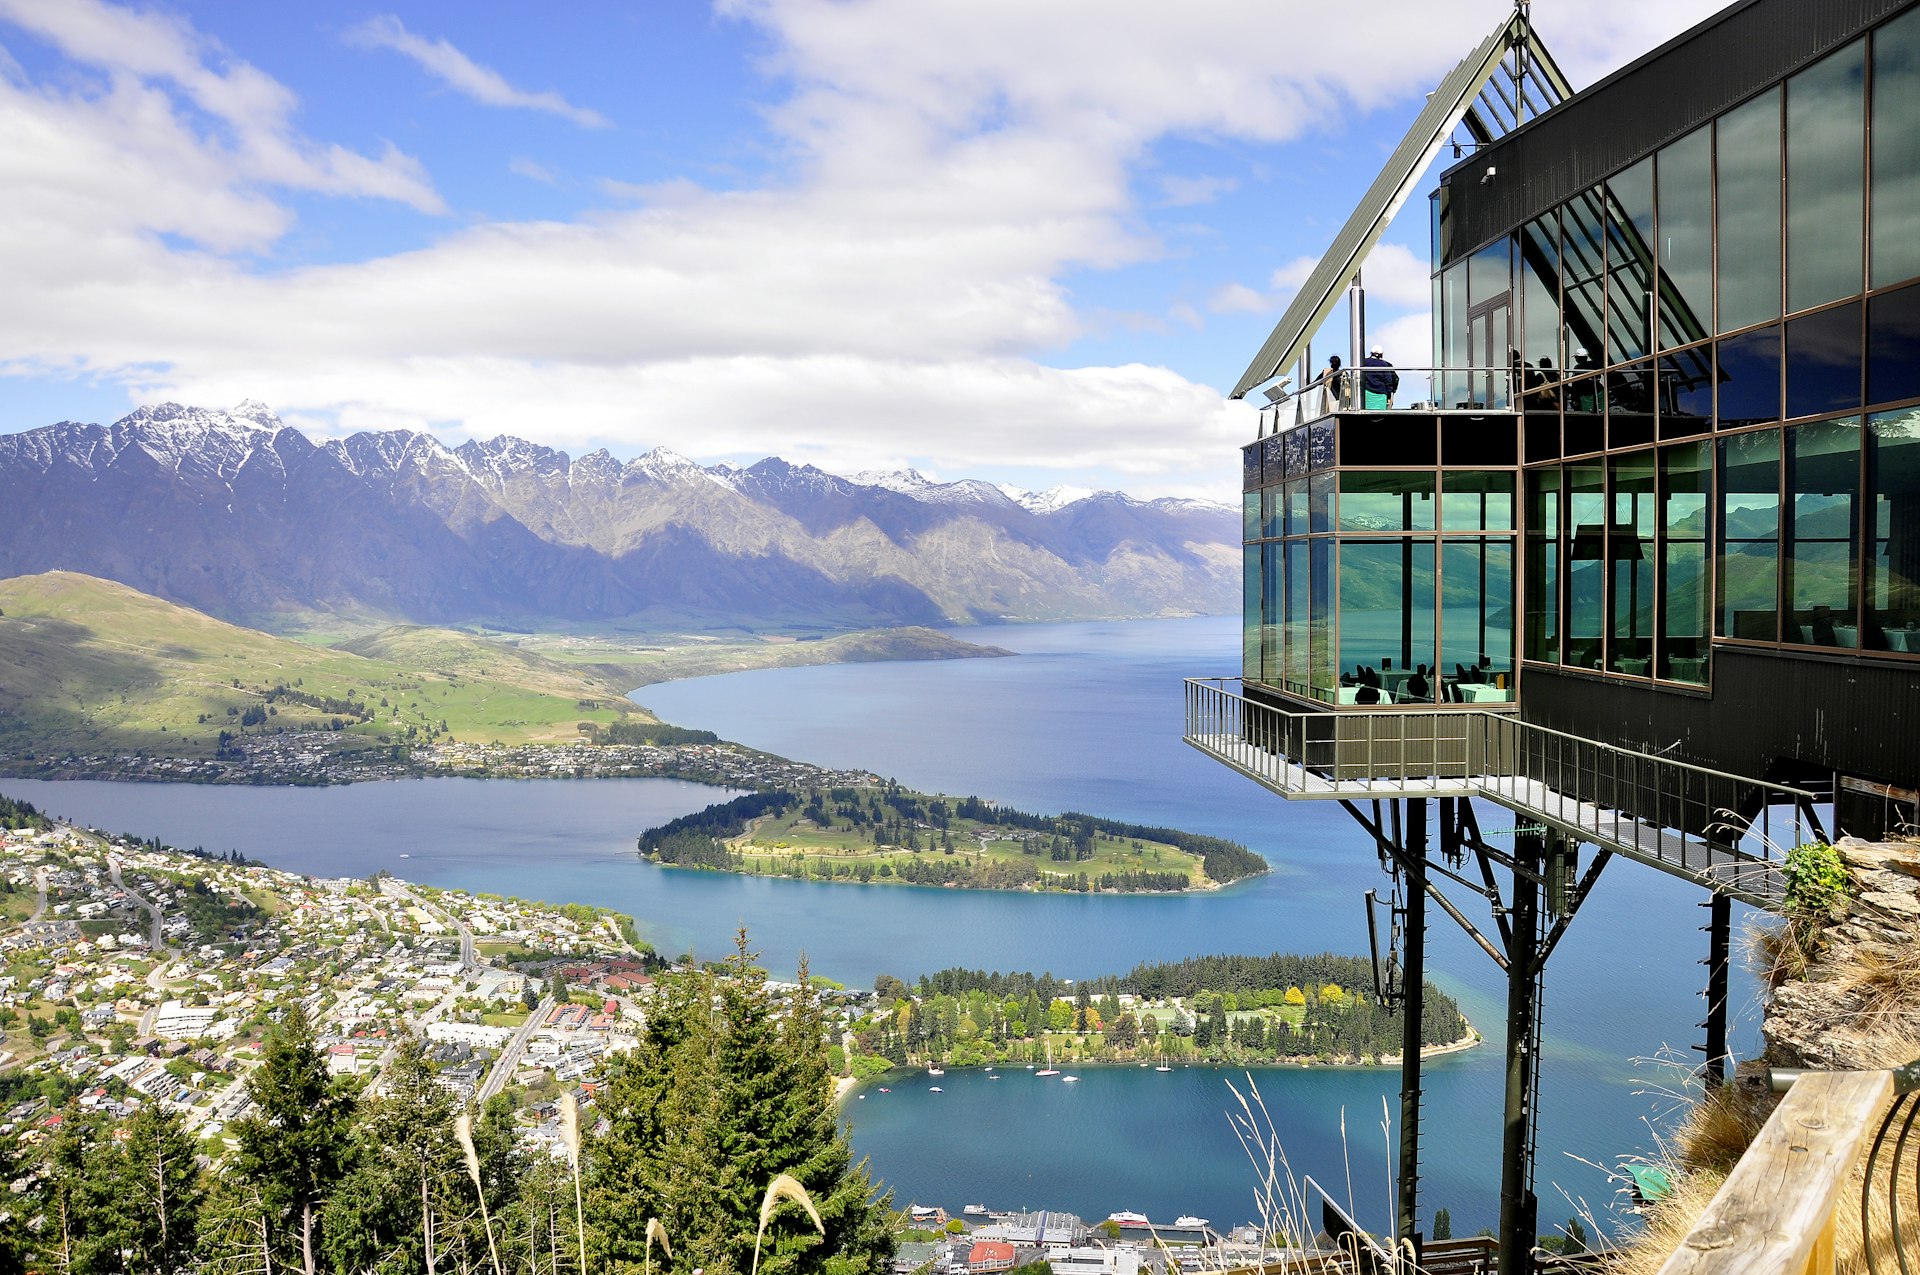 A large glass building sits on a high hill overlooking the Queenstown skyline of snow-capped mountains and a large lake with a large chunk of greenery jutting into the water